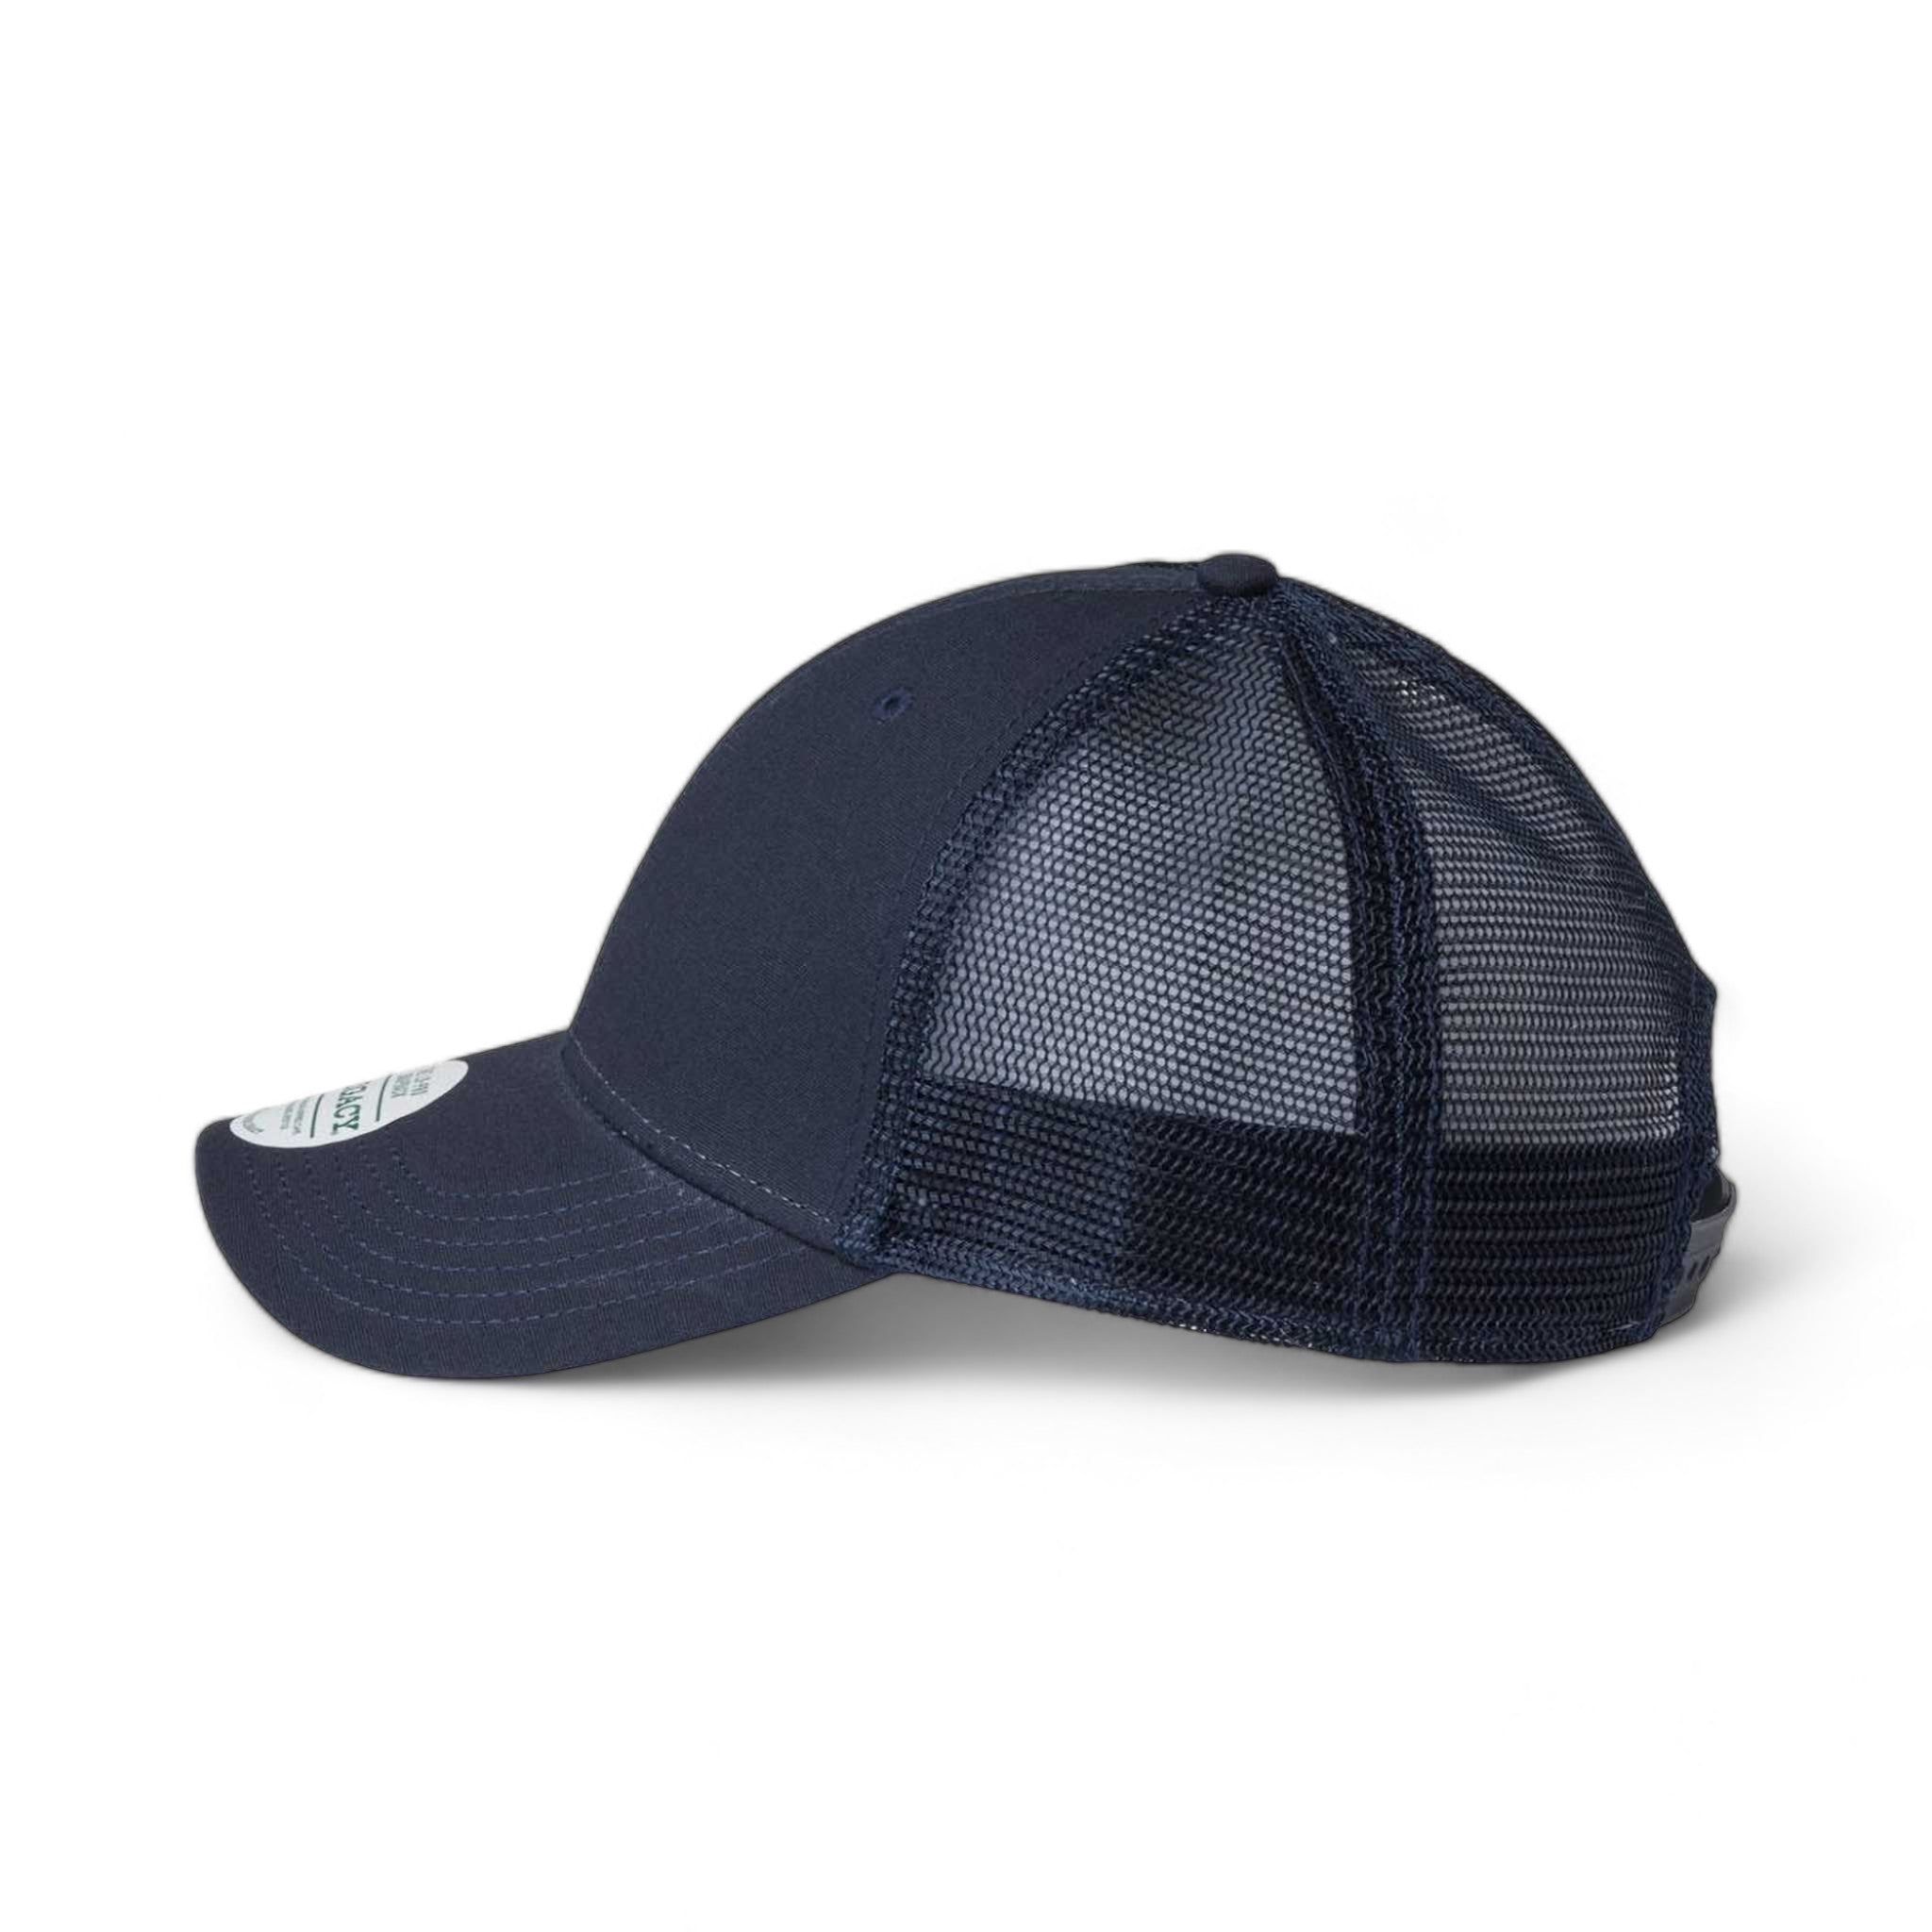 Side view of LEGACY LPS custom hat in navy and navy